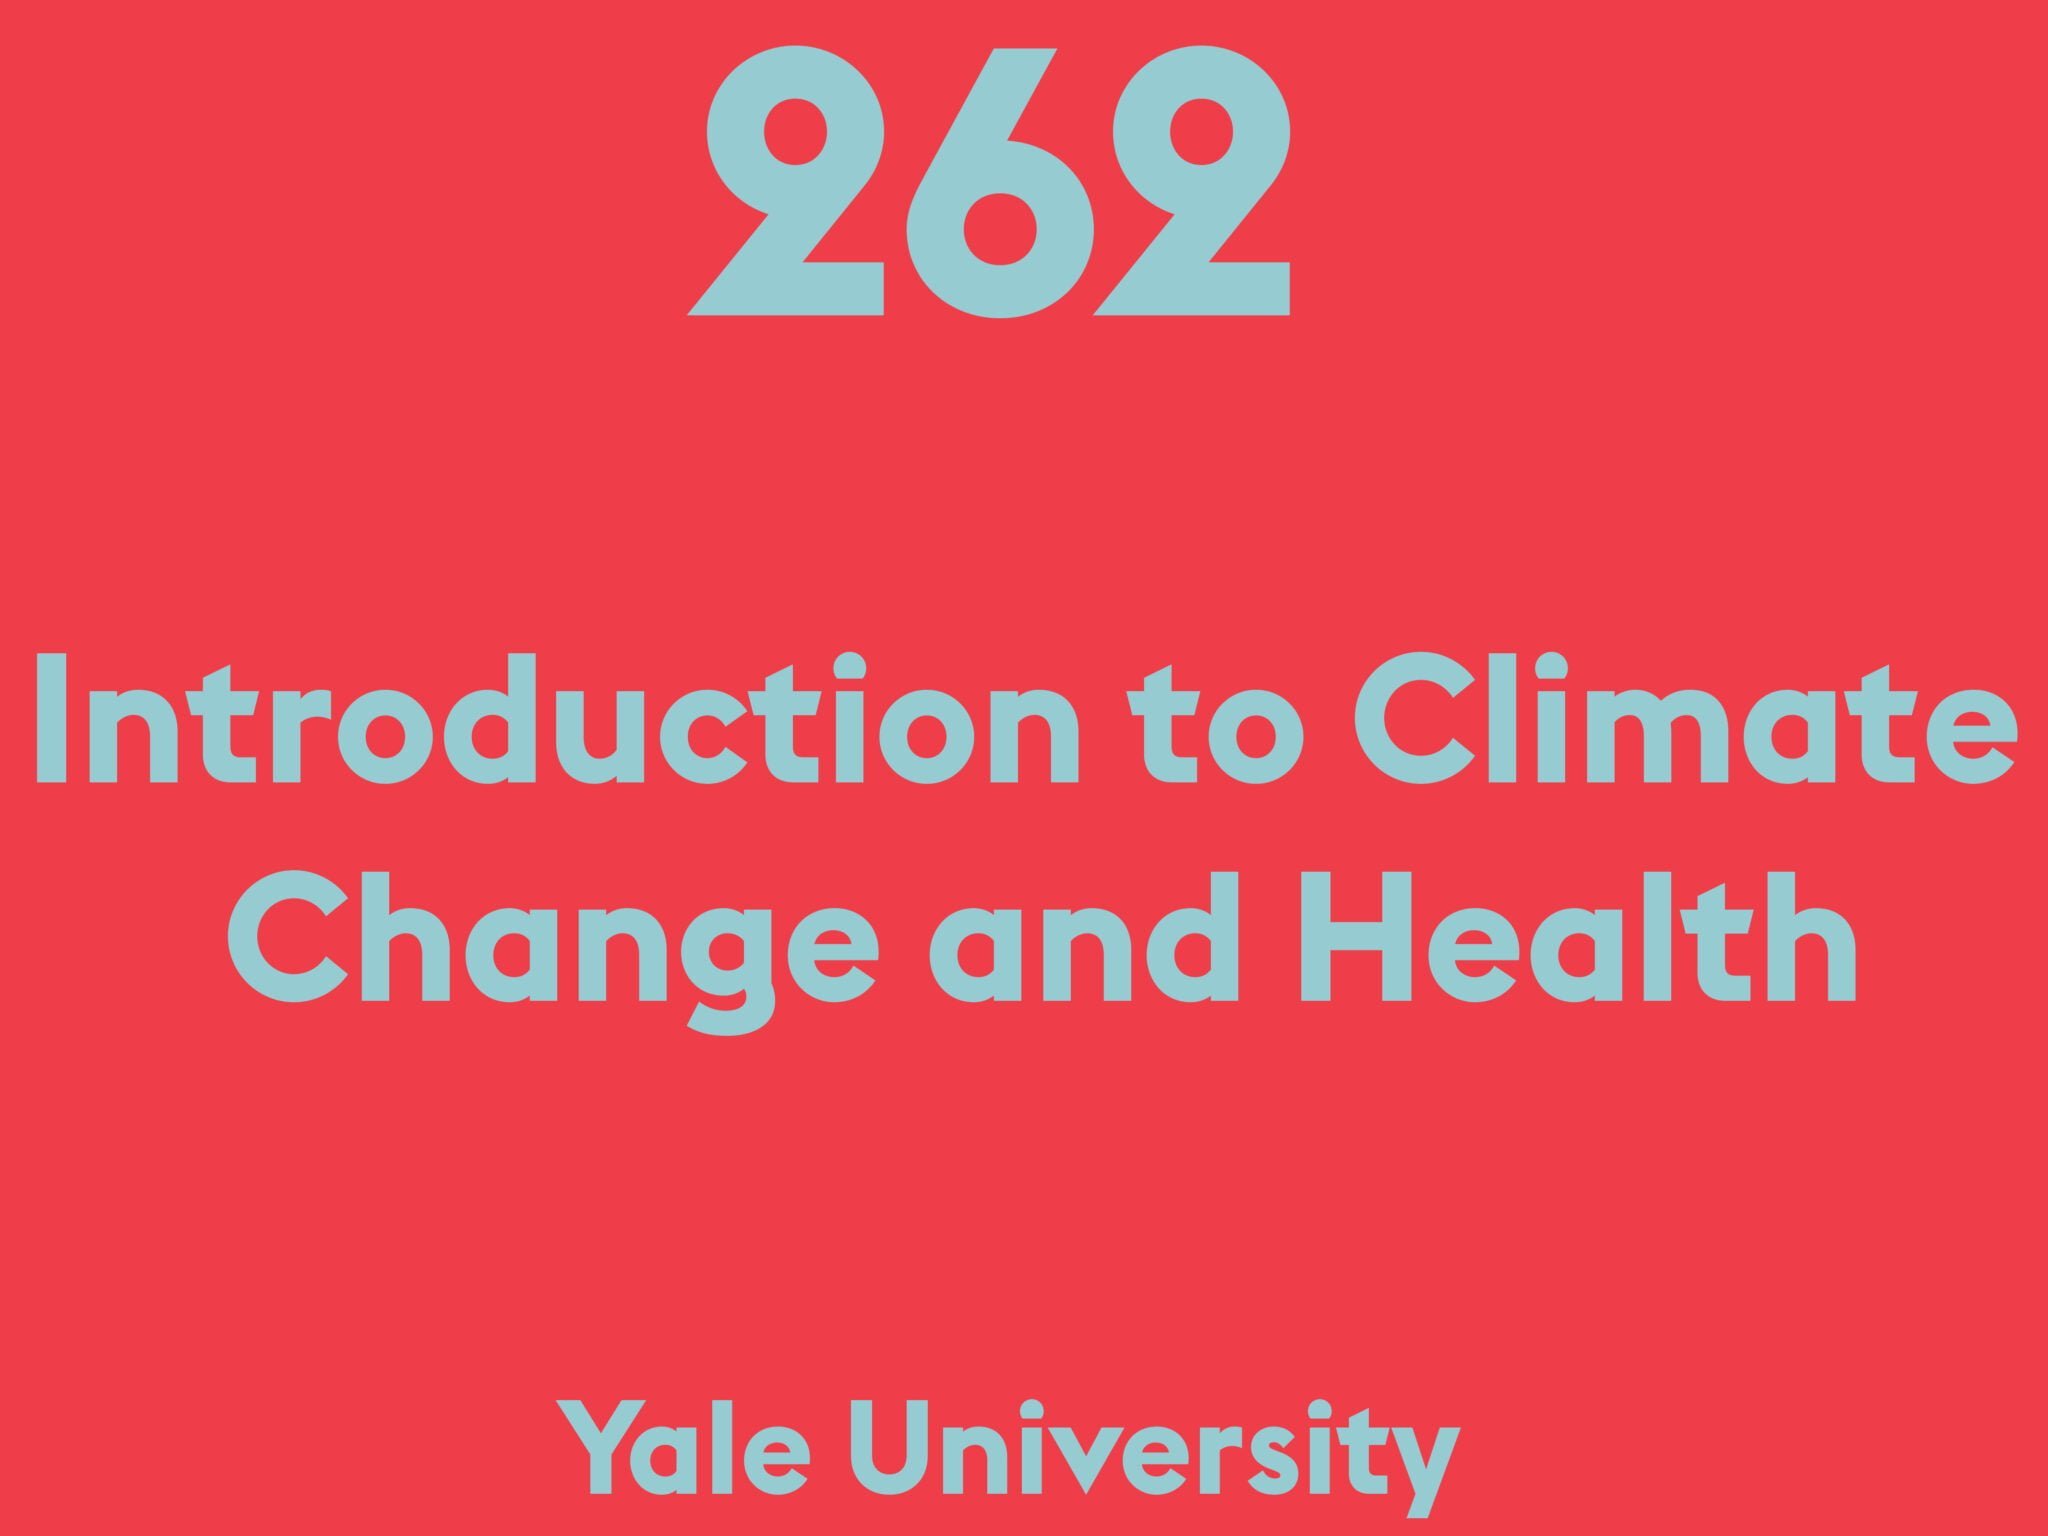 Introduction to Climate Change and Health